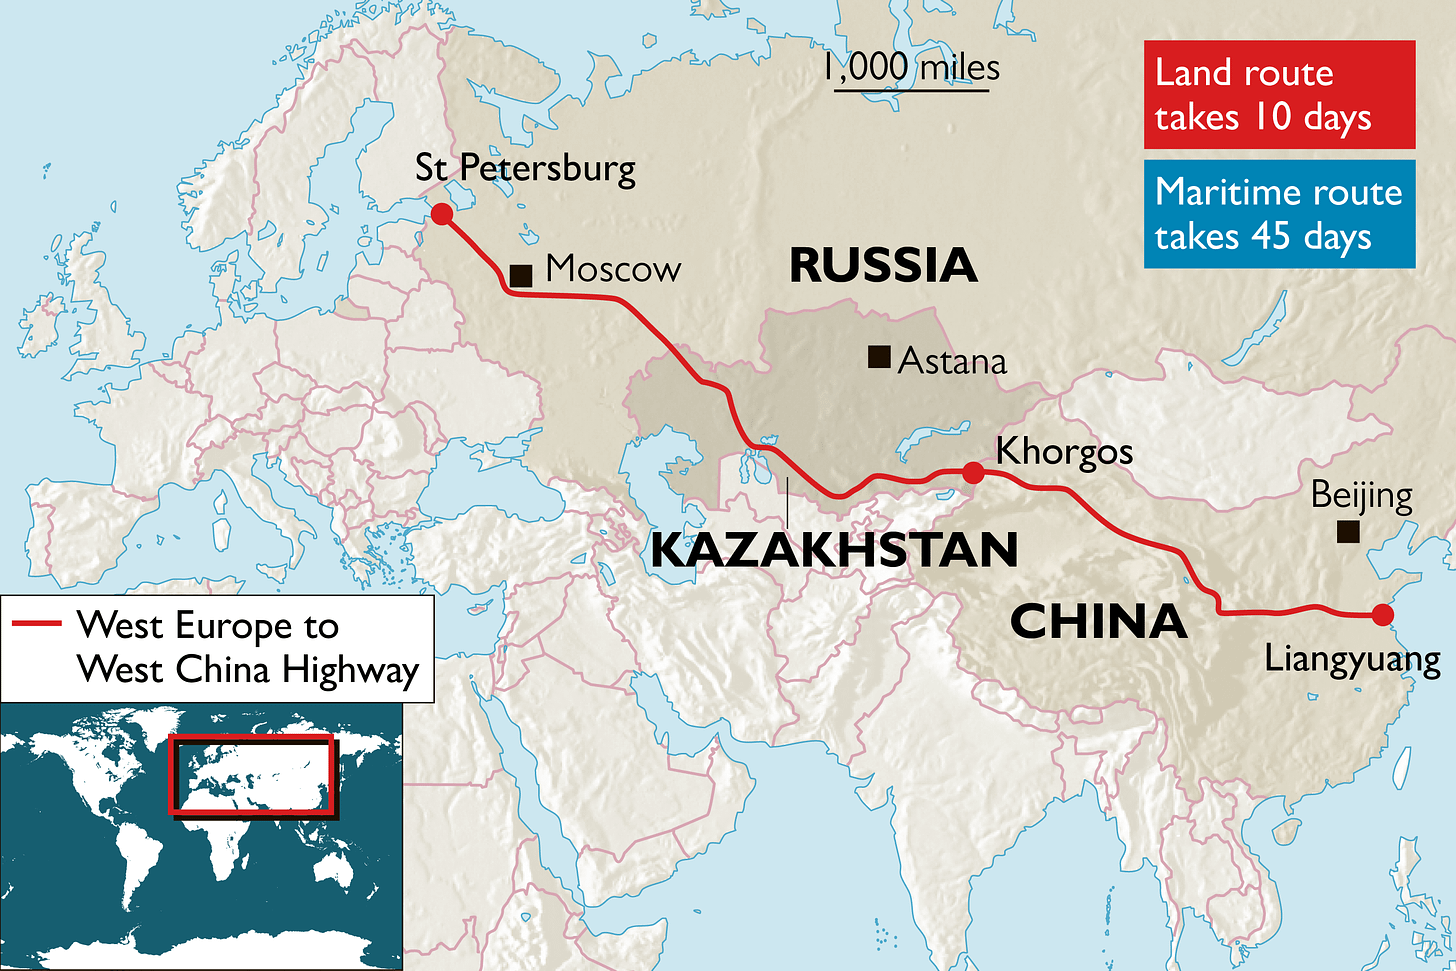 China completes new silk road to Europe | World | The Times